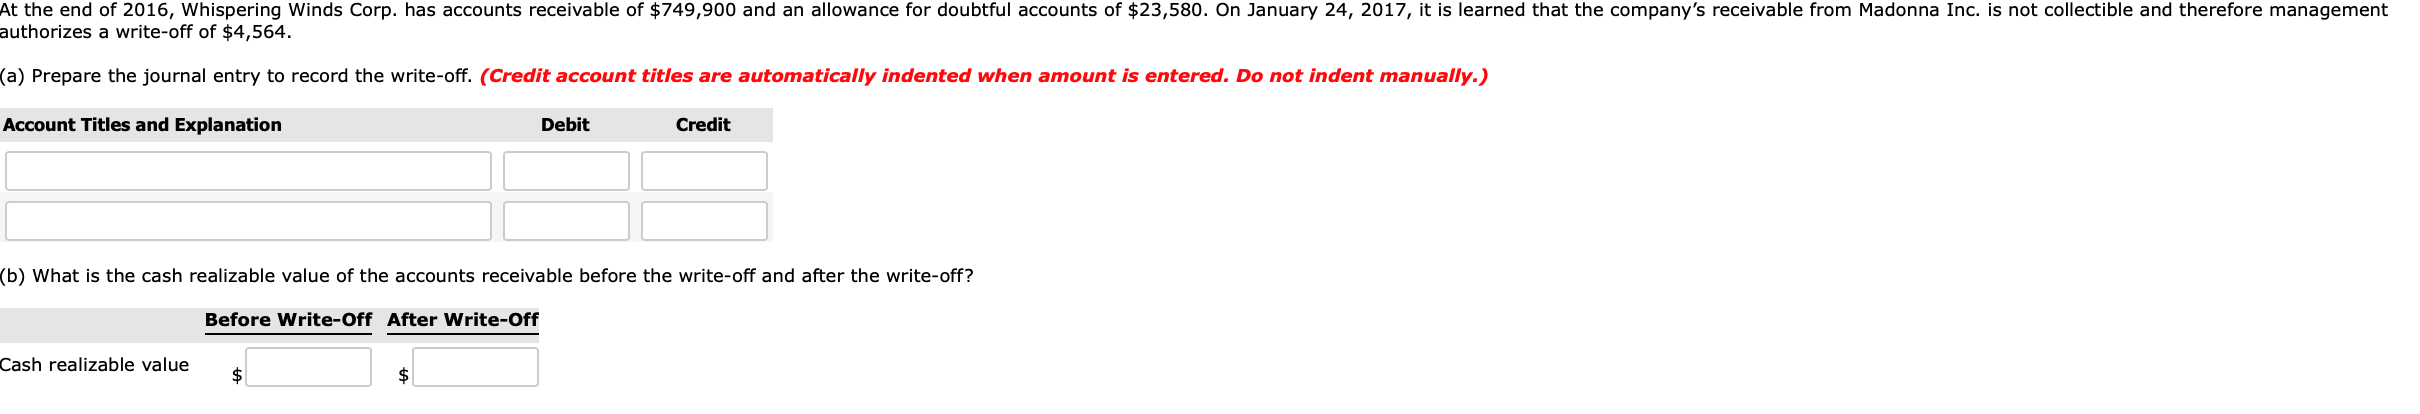 At the end of 2016, Whispering Winds Corp. has accounts receivable of $749,900 and an allowance for doubtful accounts of $23,580. On January 24, 2017, it is learned that the company's receivable from Madonna Inc. is not collectible and therefore management
authorizes a write-off of $4,564.
(a) Prepare the journal entry to record the write-off. (Credit account titles are automatically indented when amount is entered. Do not indent manually.)
Account Titles and Explanation
Debit
Credit
(b) What is the cash realizable value of the accounts receivable before the write-off and after the write-off?
Before Write-Off After Write-Off
Cash realizable value
2$
